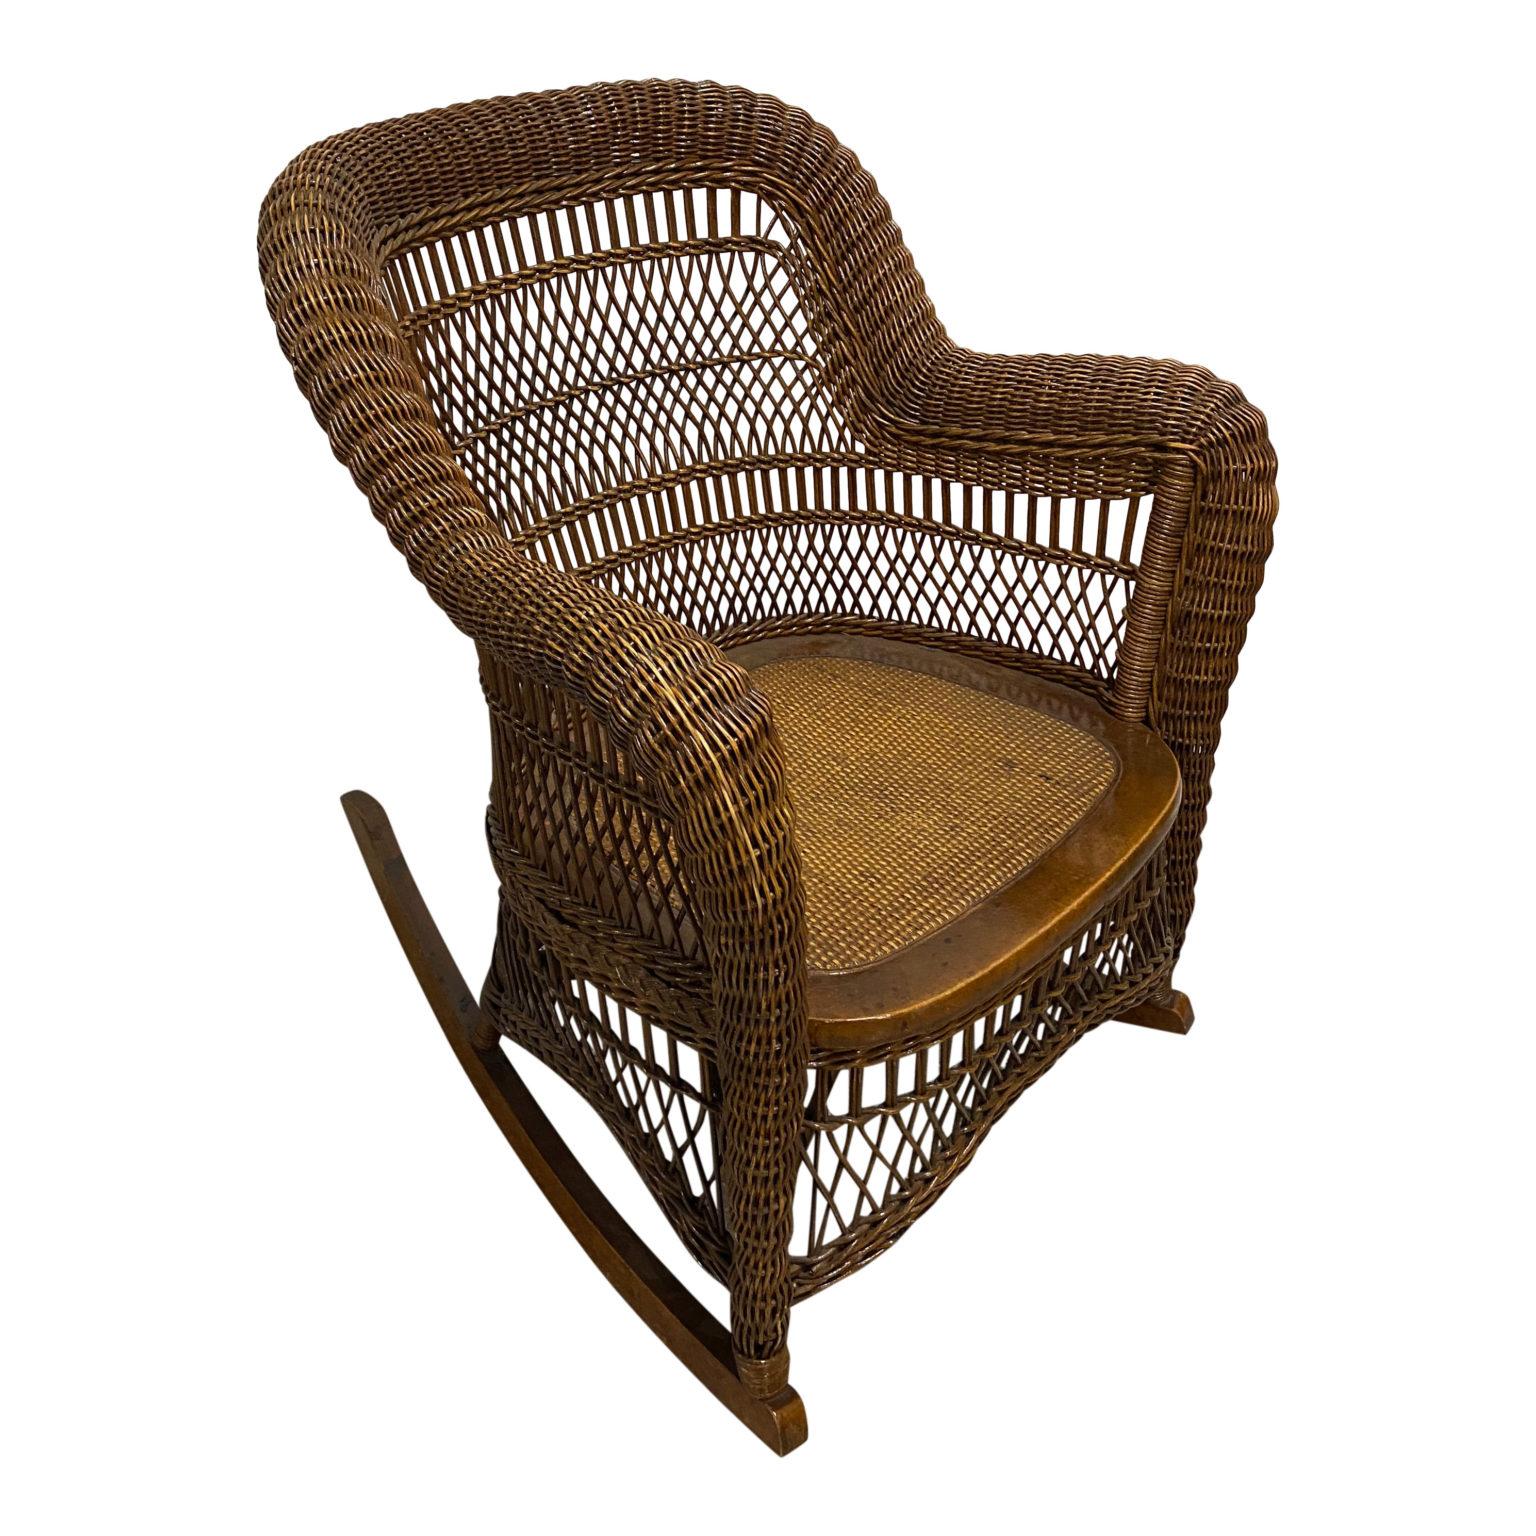 Exceptional Antique Dark Wicker Rocking Chair In Good Condition For Sale In Sag Harbor, NY